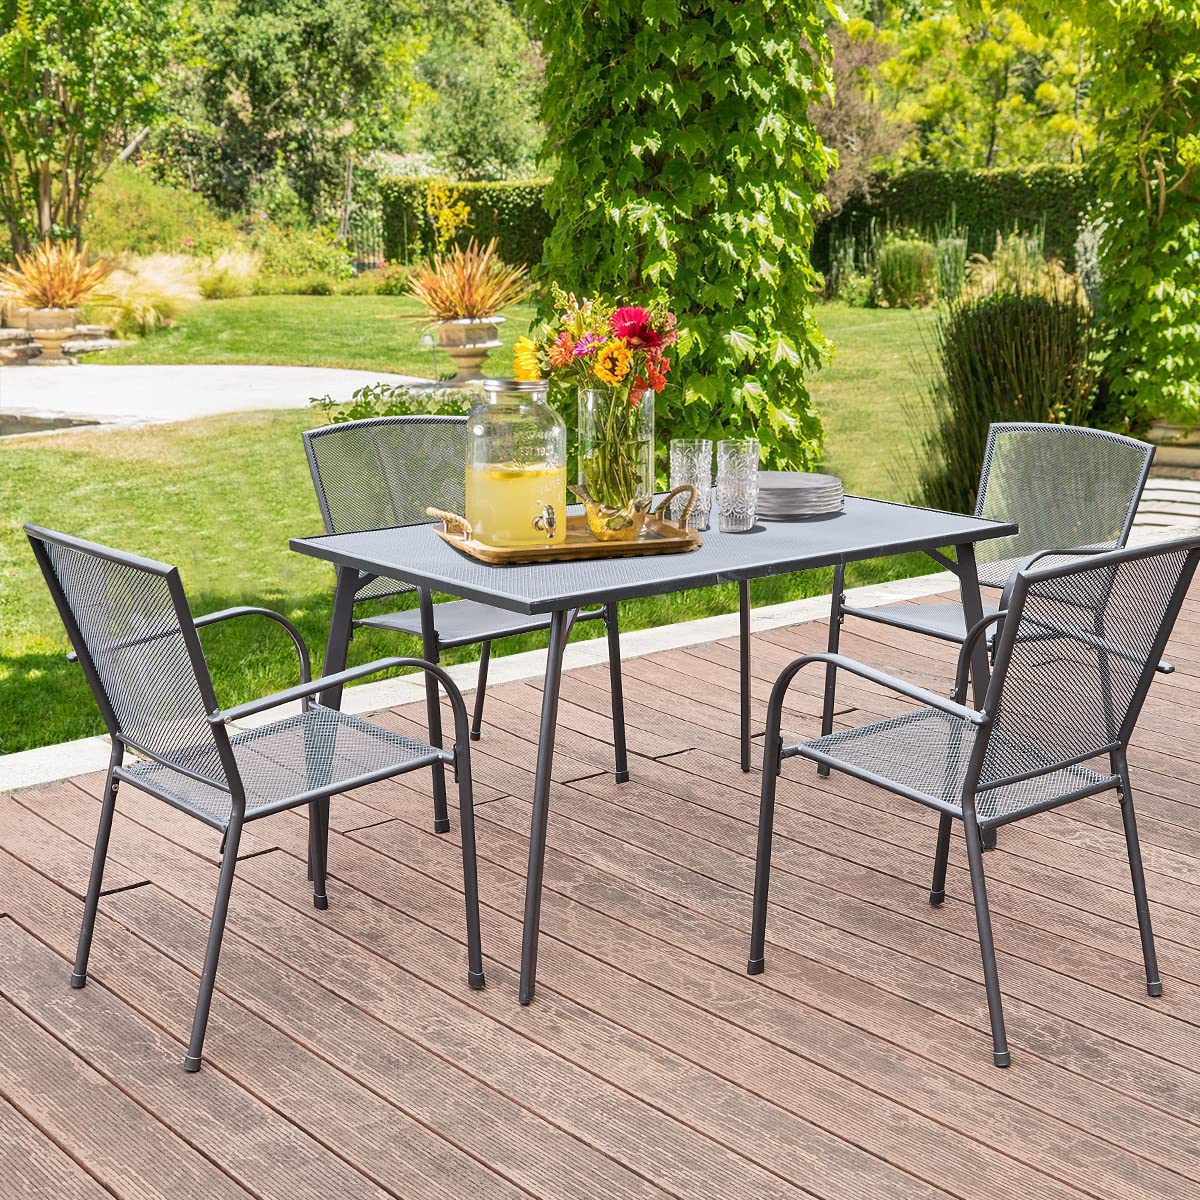 How To Choose Outdoor Metal Furniture